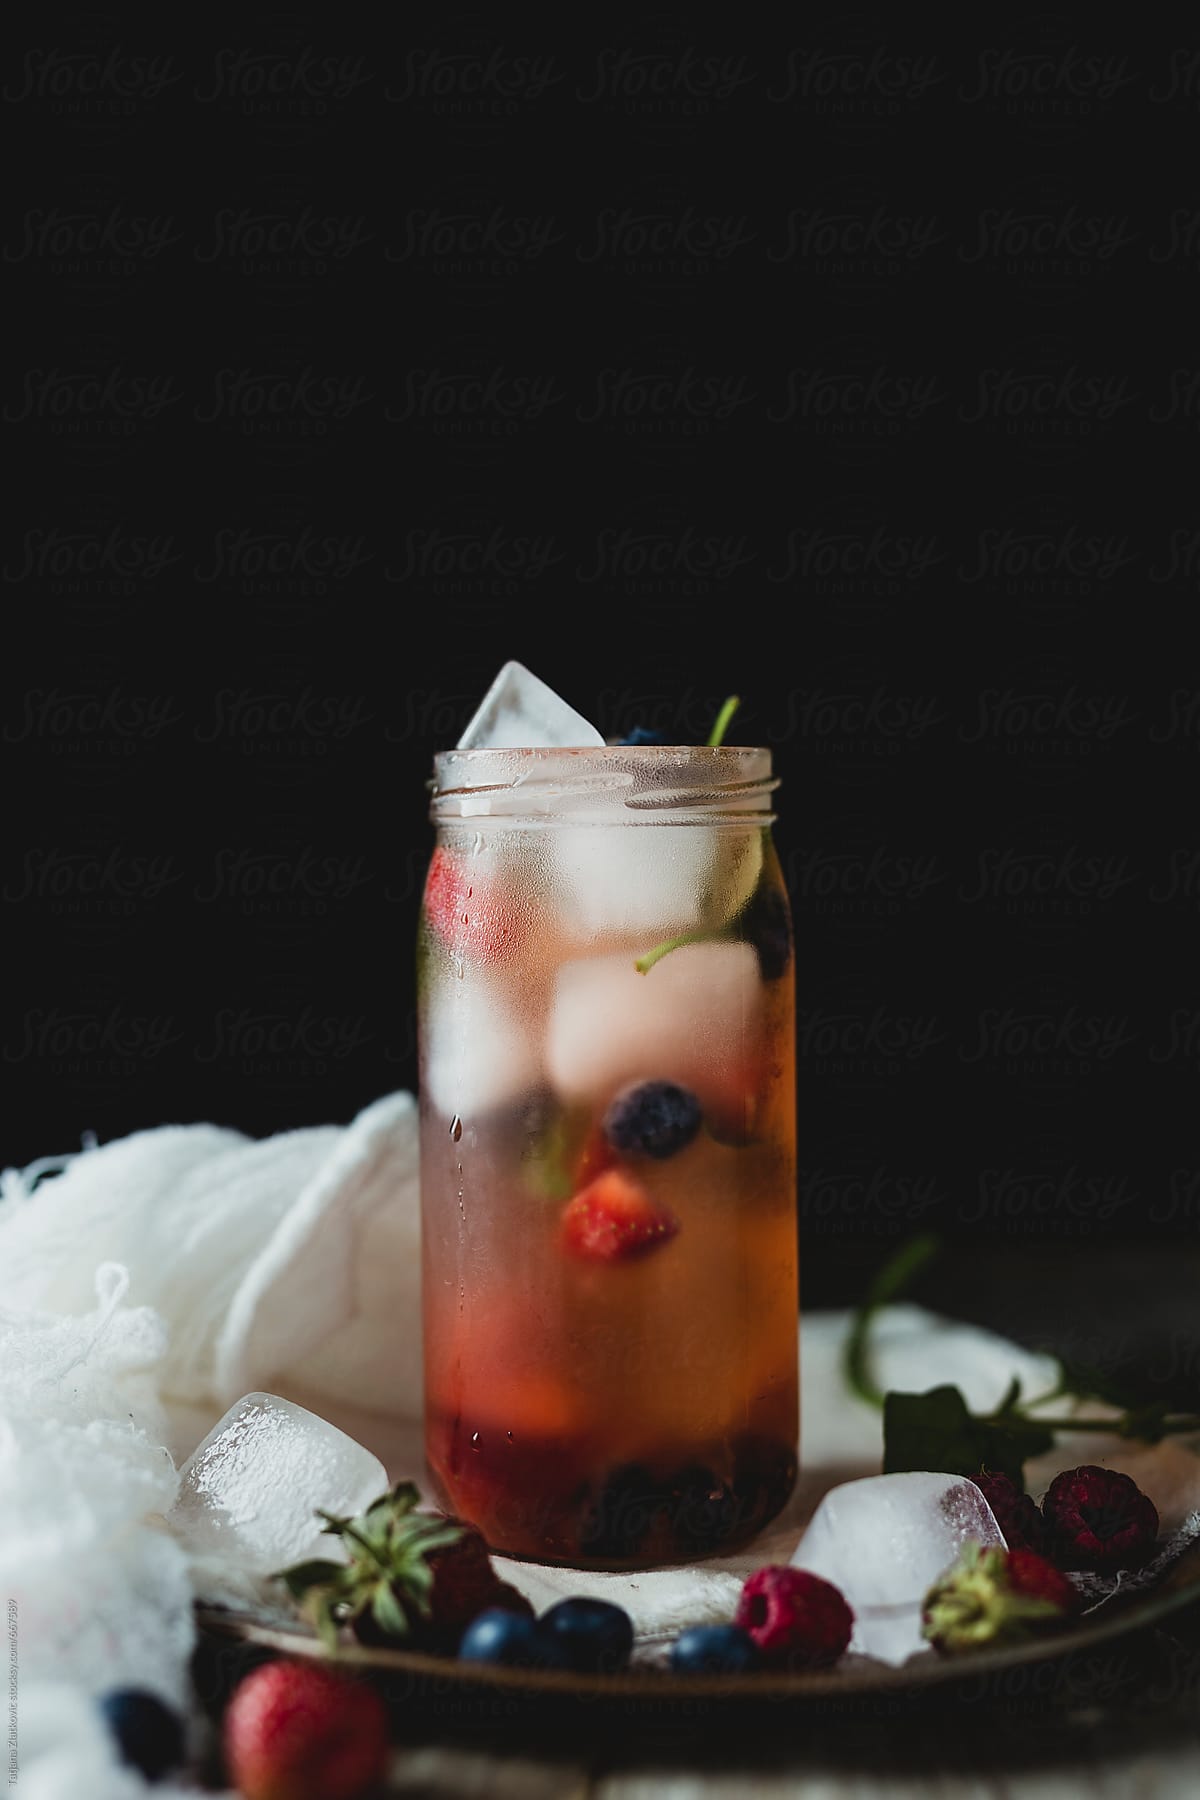 Cold lemonade with berry fruit